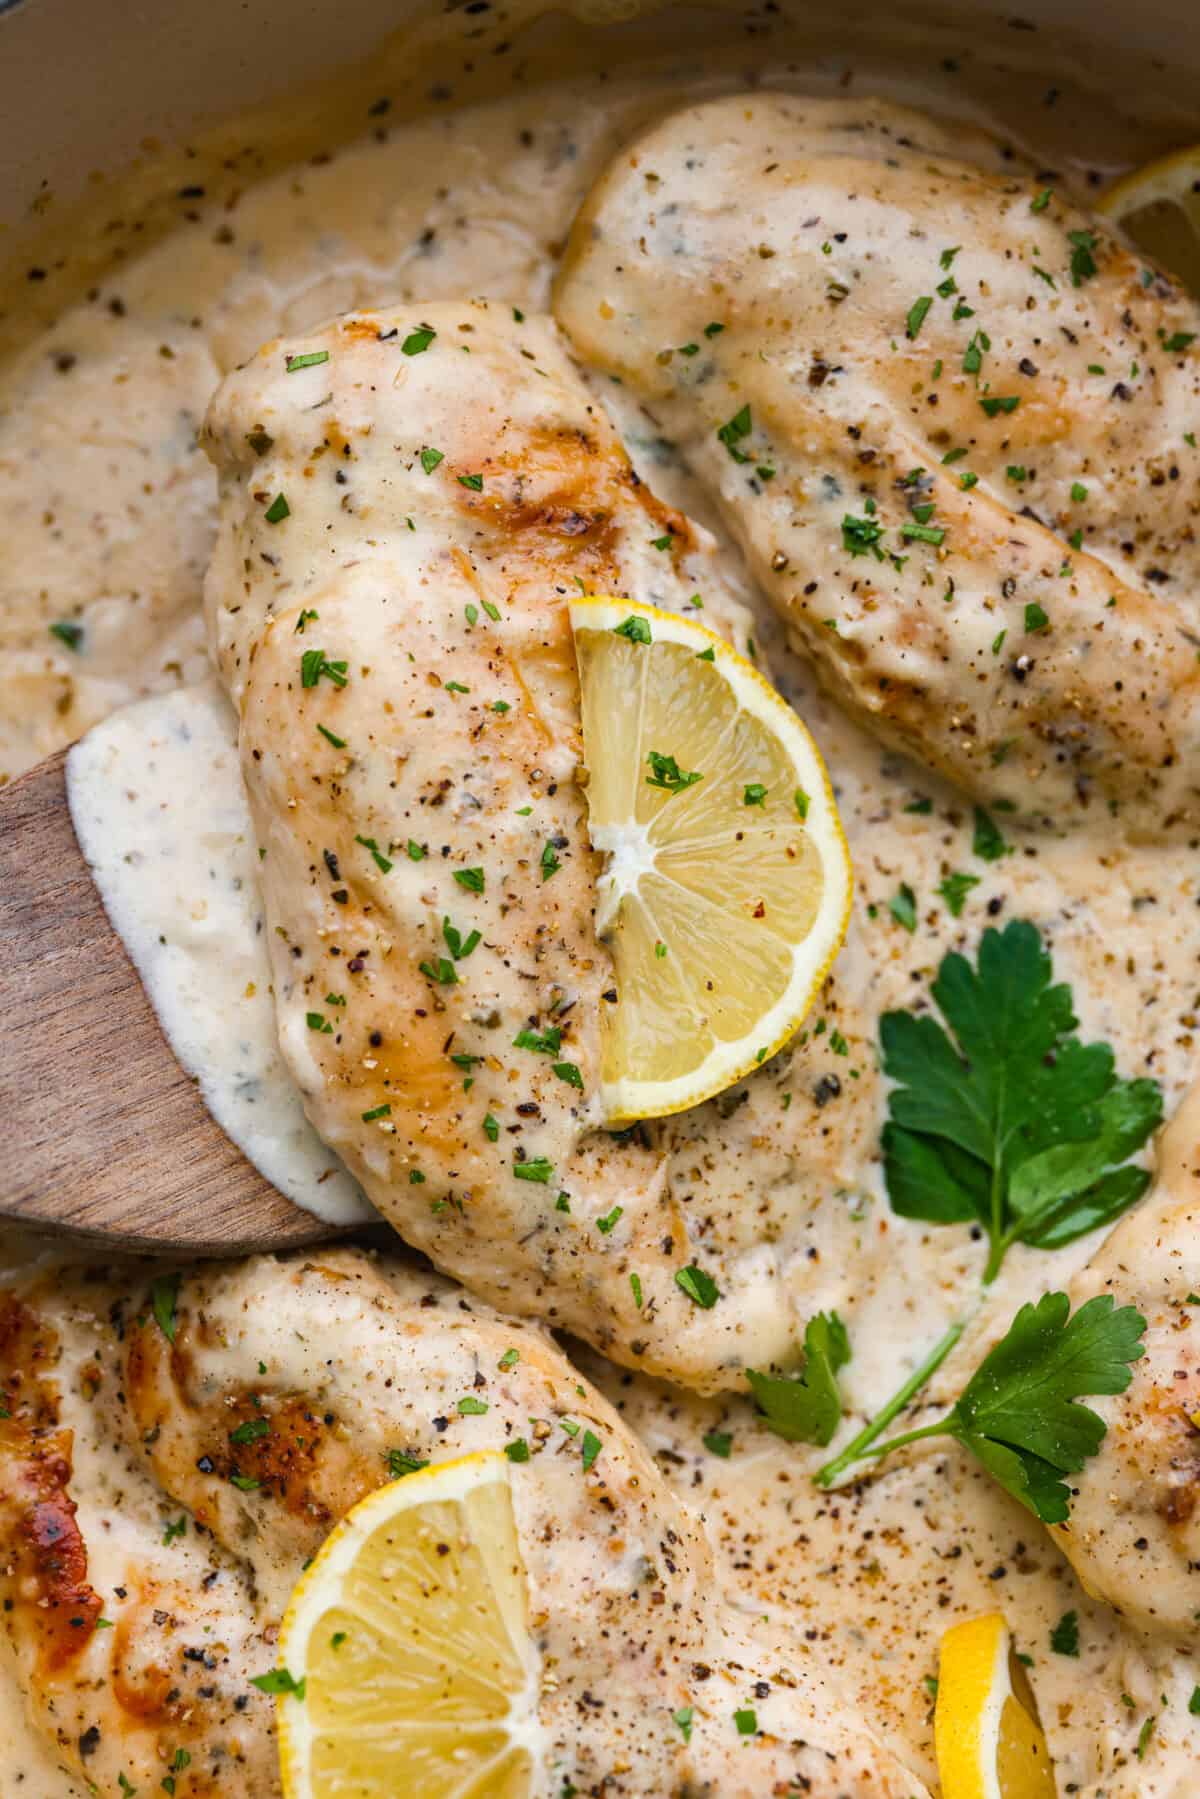 Closeup of a chicken breast coated in the creamy lemon sauce being lifted out of the pan with a wooden spatula.